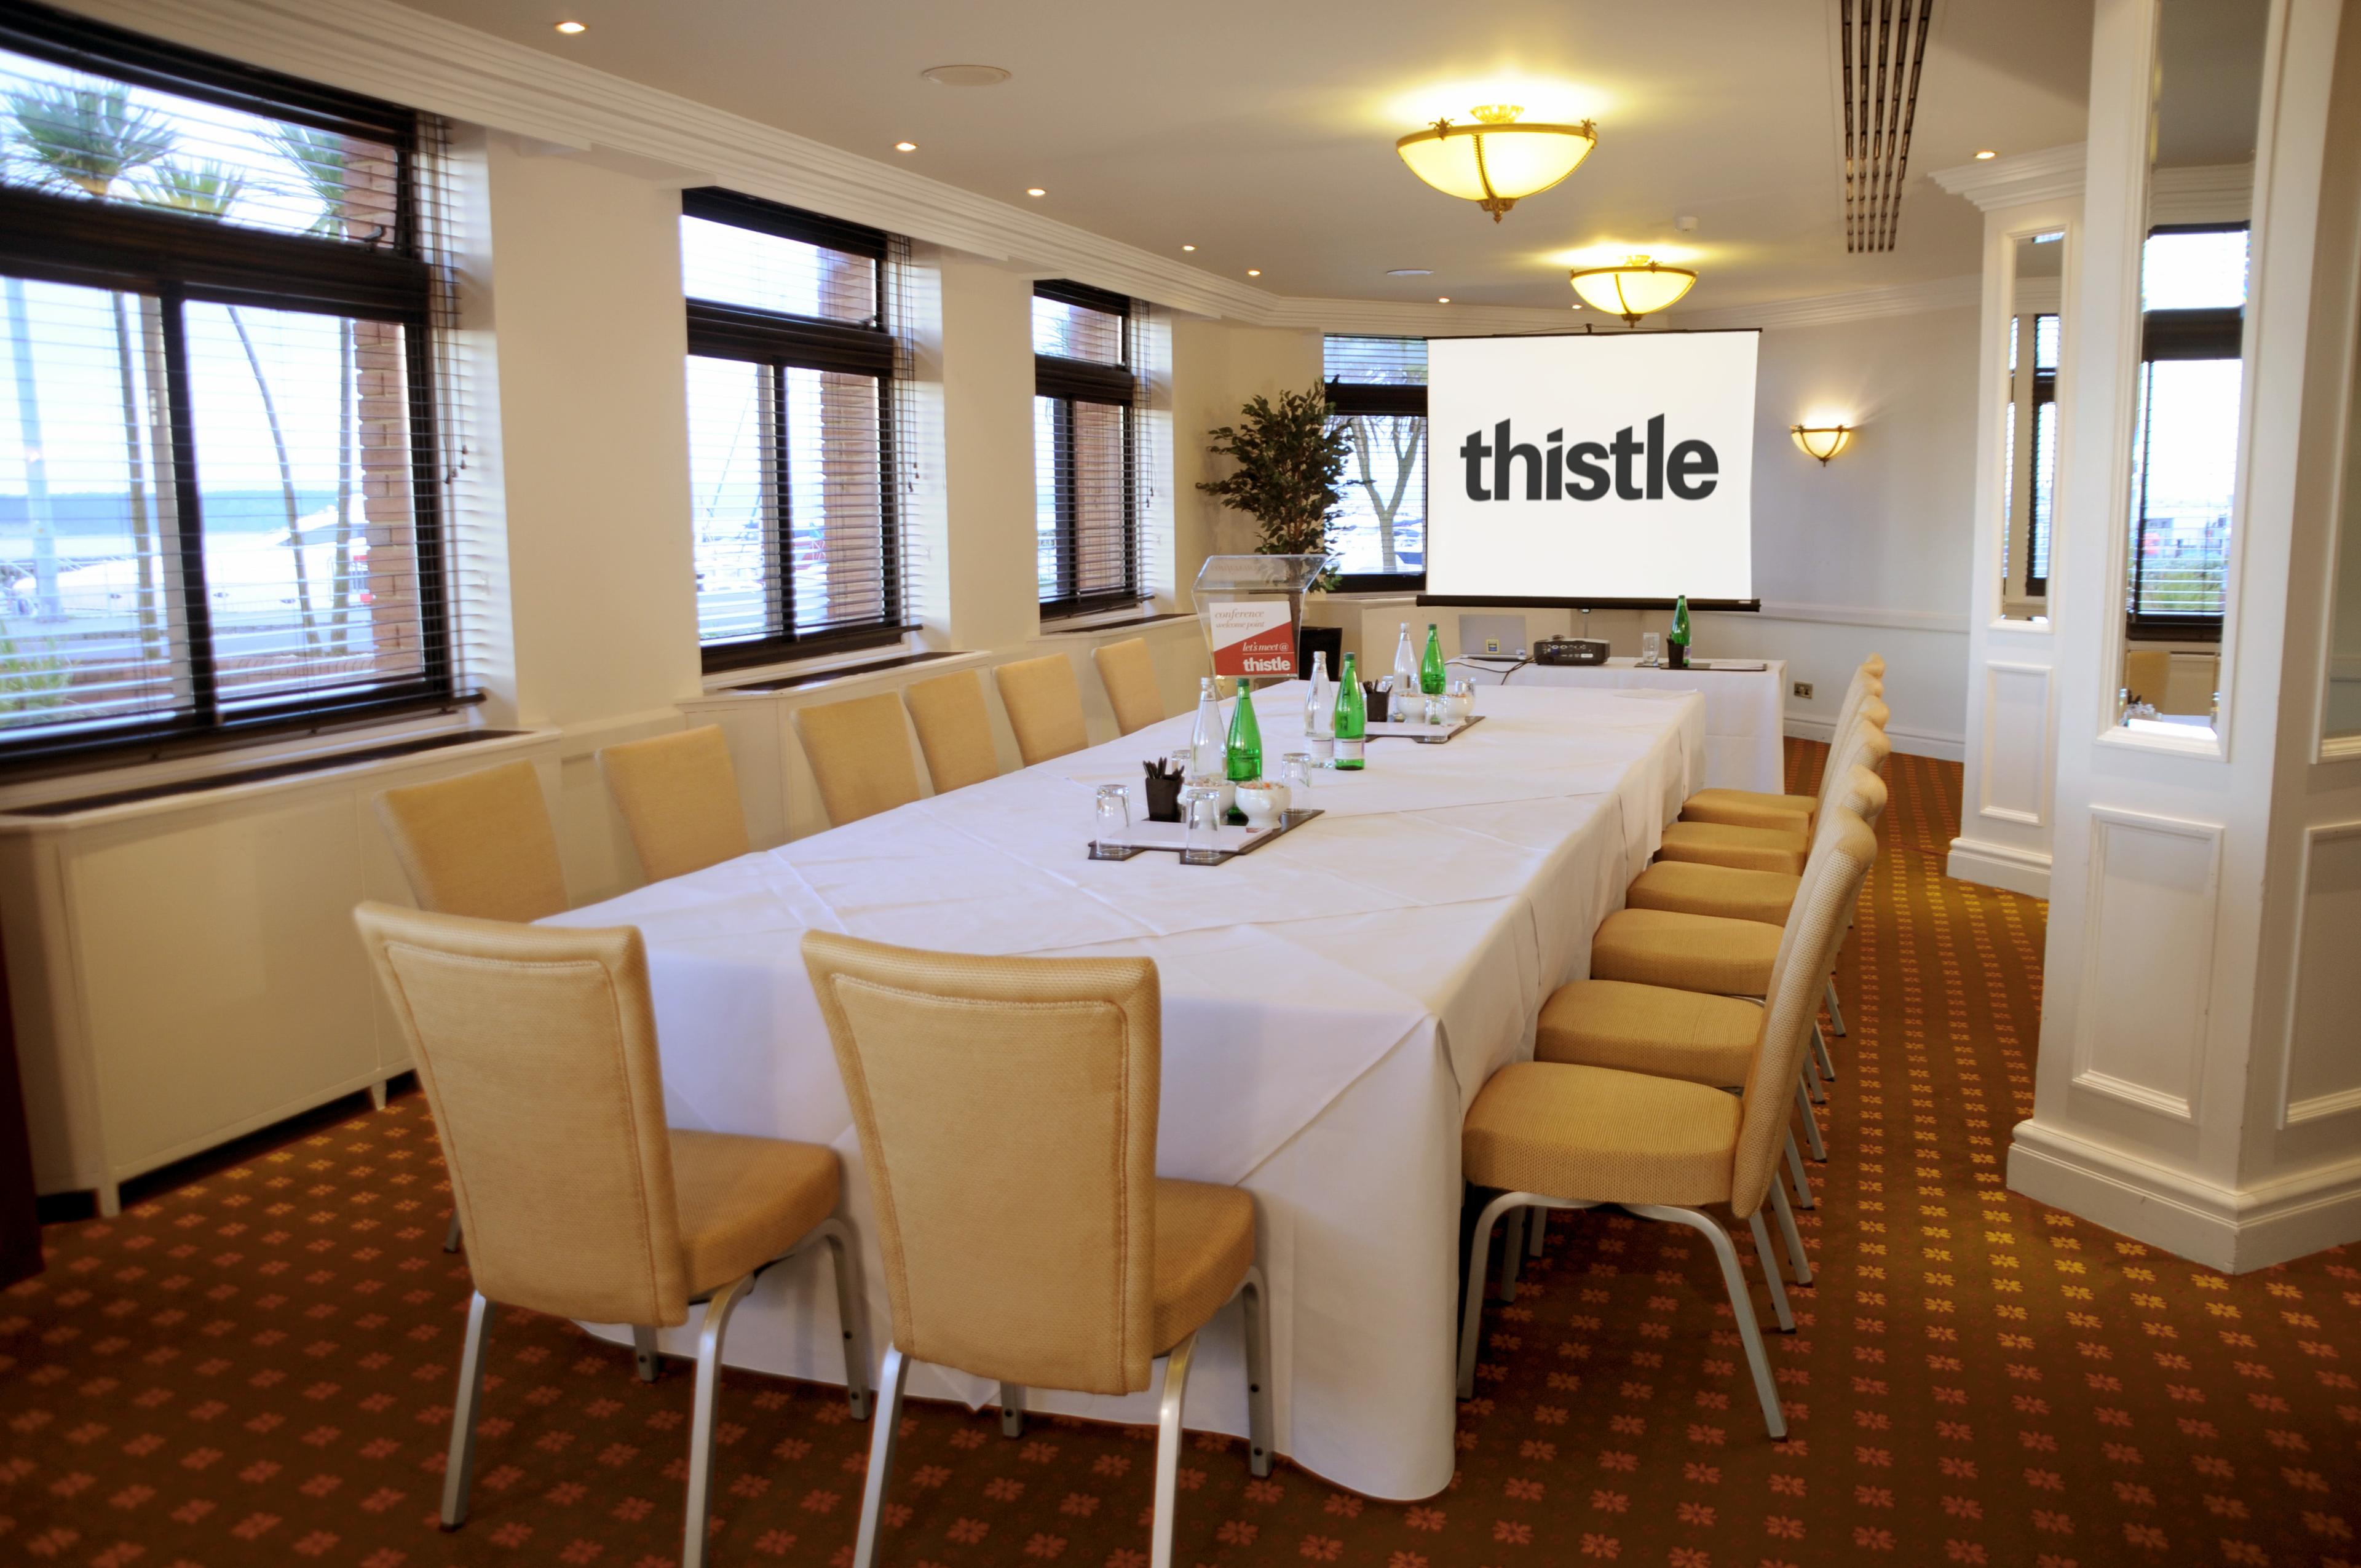 Harbour View Restaurant, Thistle Poole Hotel photo #1